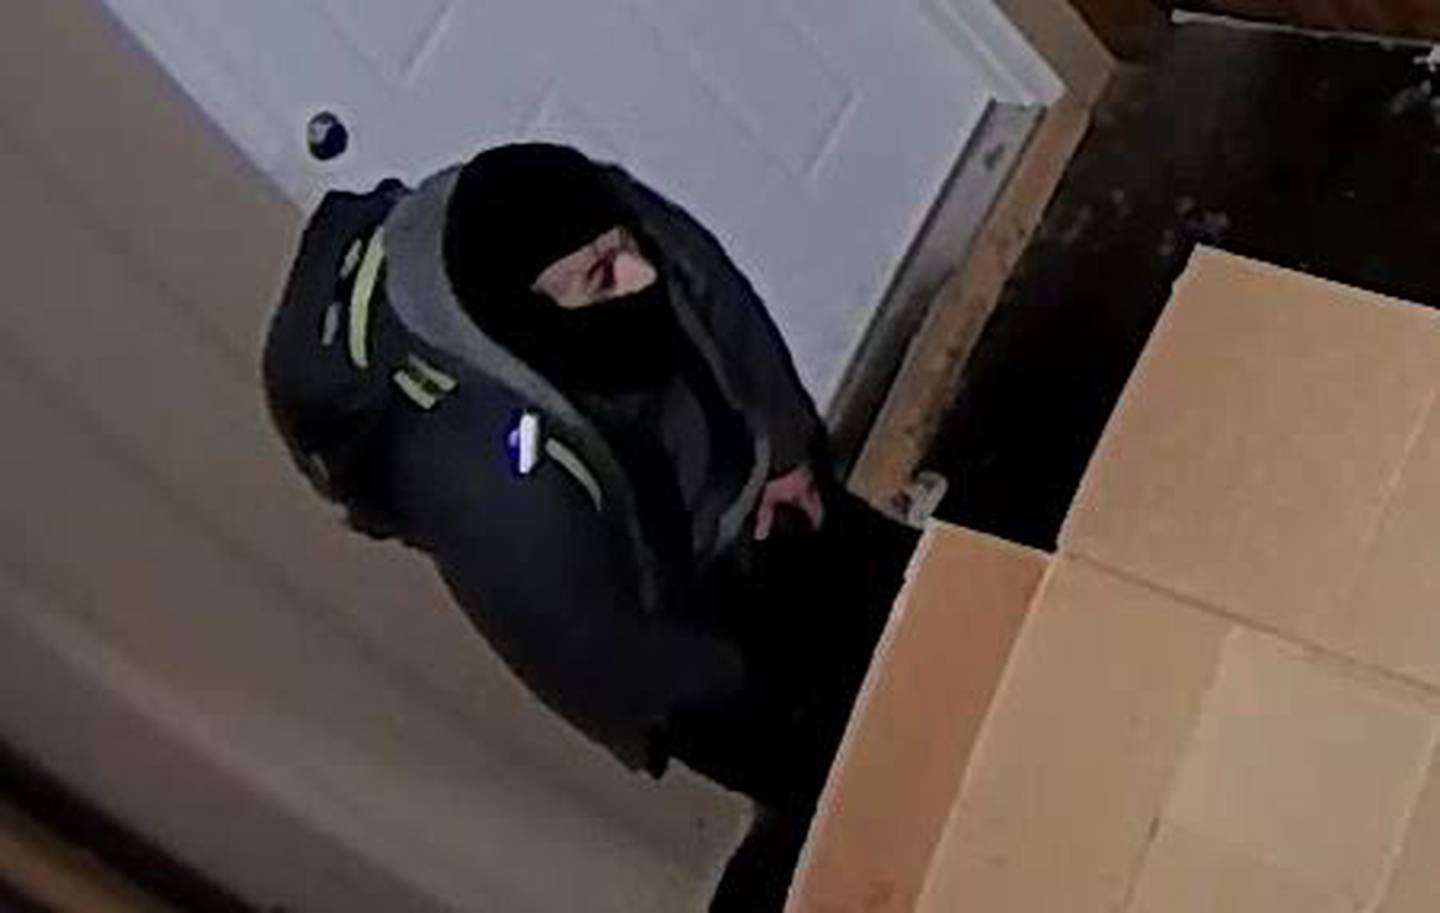 Police are looking for this man in connection with the Yakitori Sushi fire. (Anchorage Police Dept. photo)